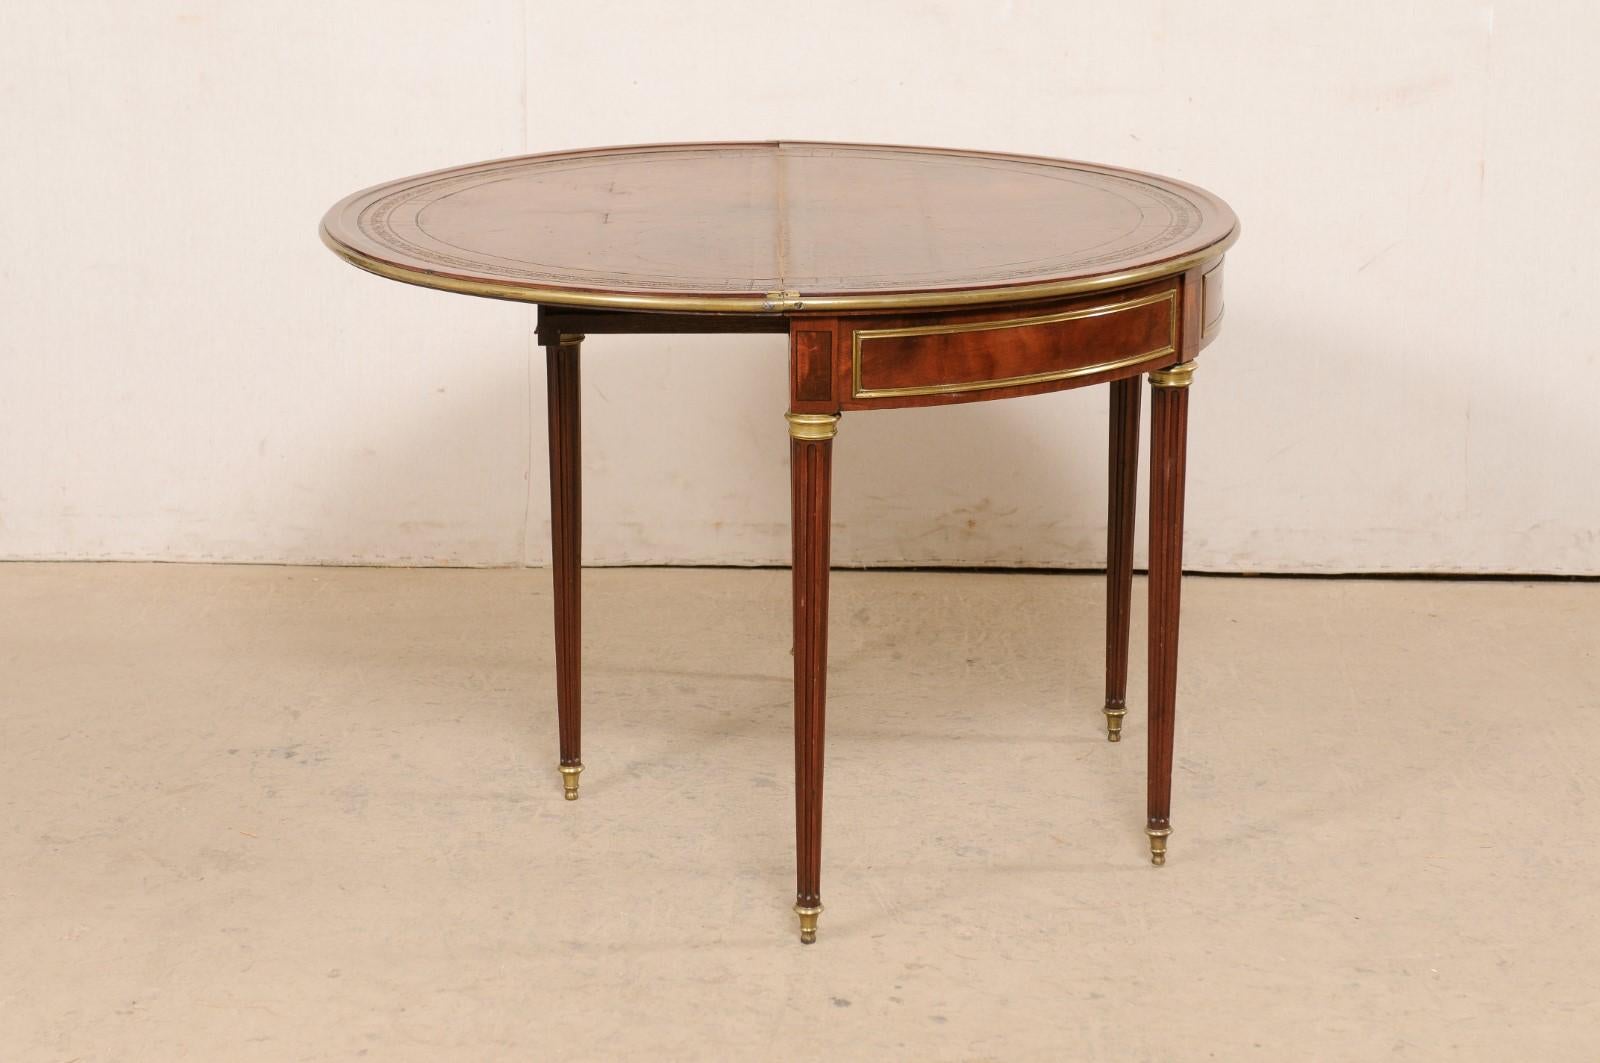  Elegant French Neoclassical Demi-to-round Table W/ Brass Accents, 19th C.  For Sale 5